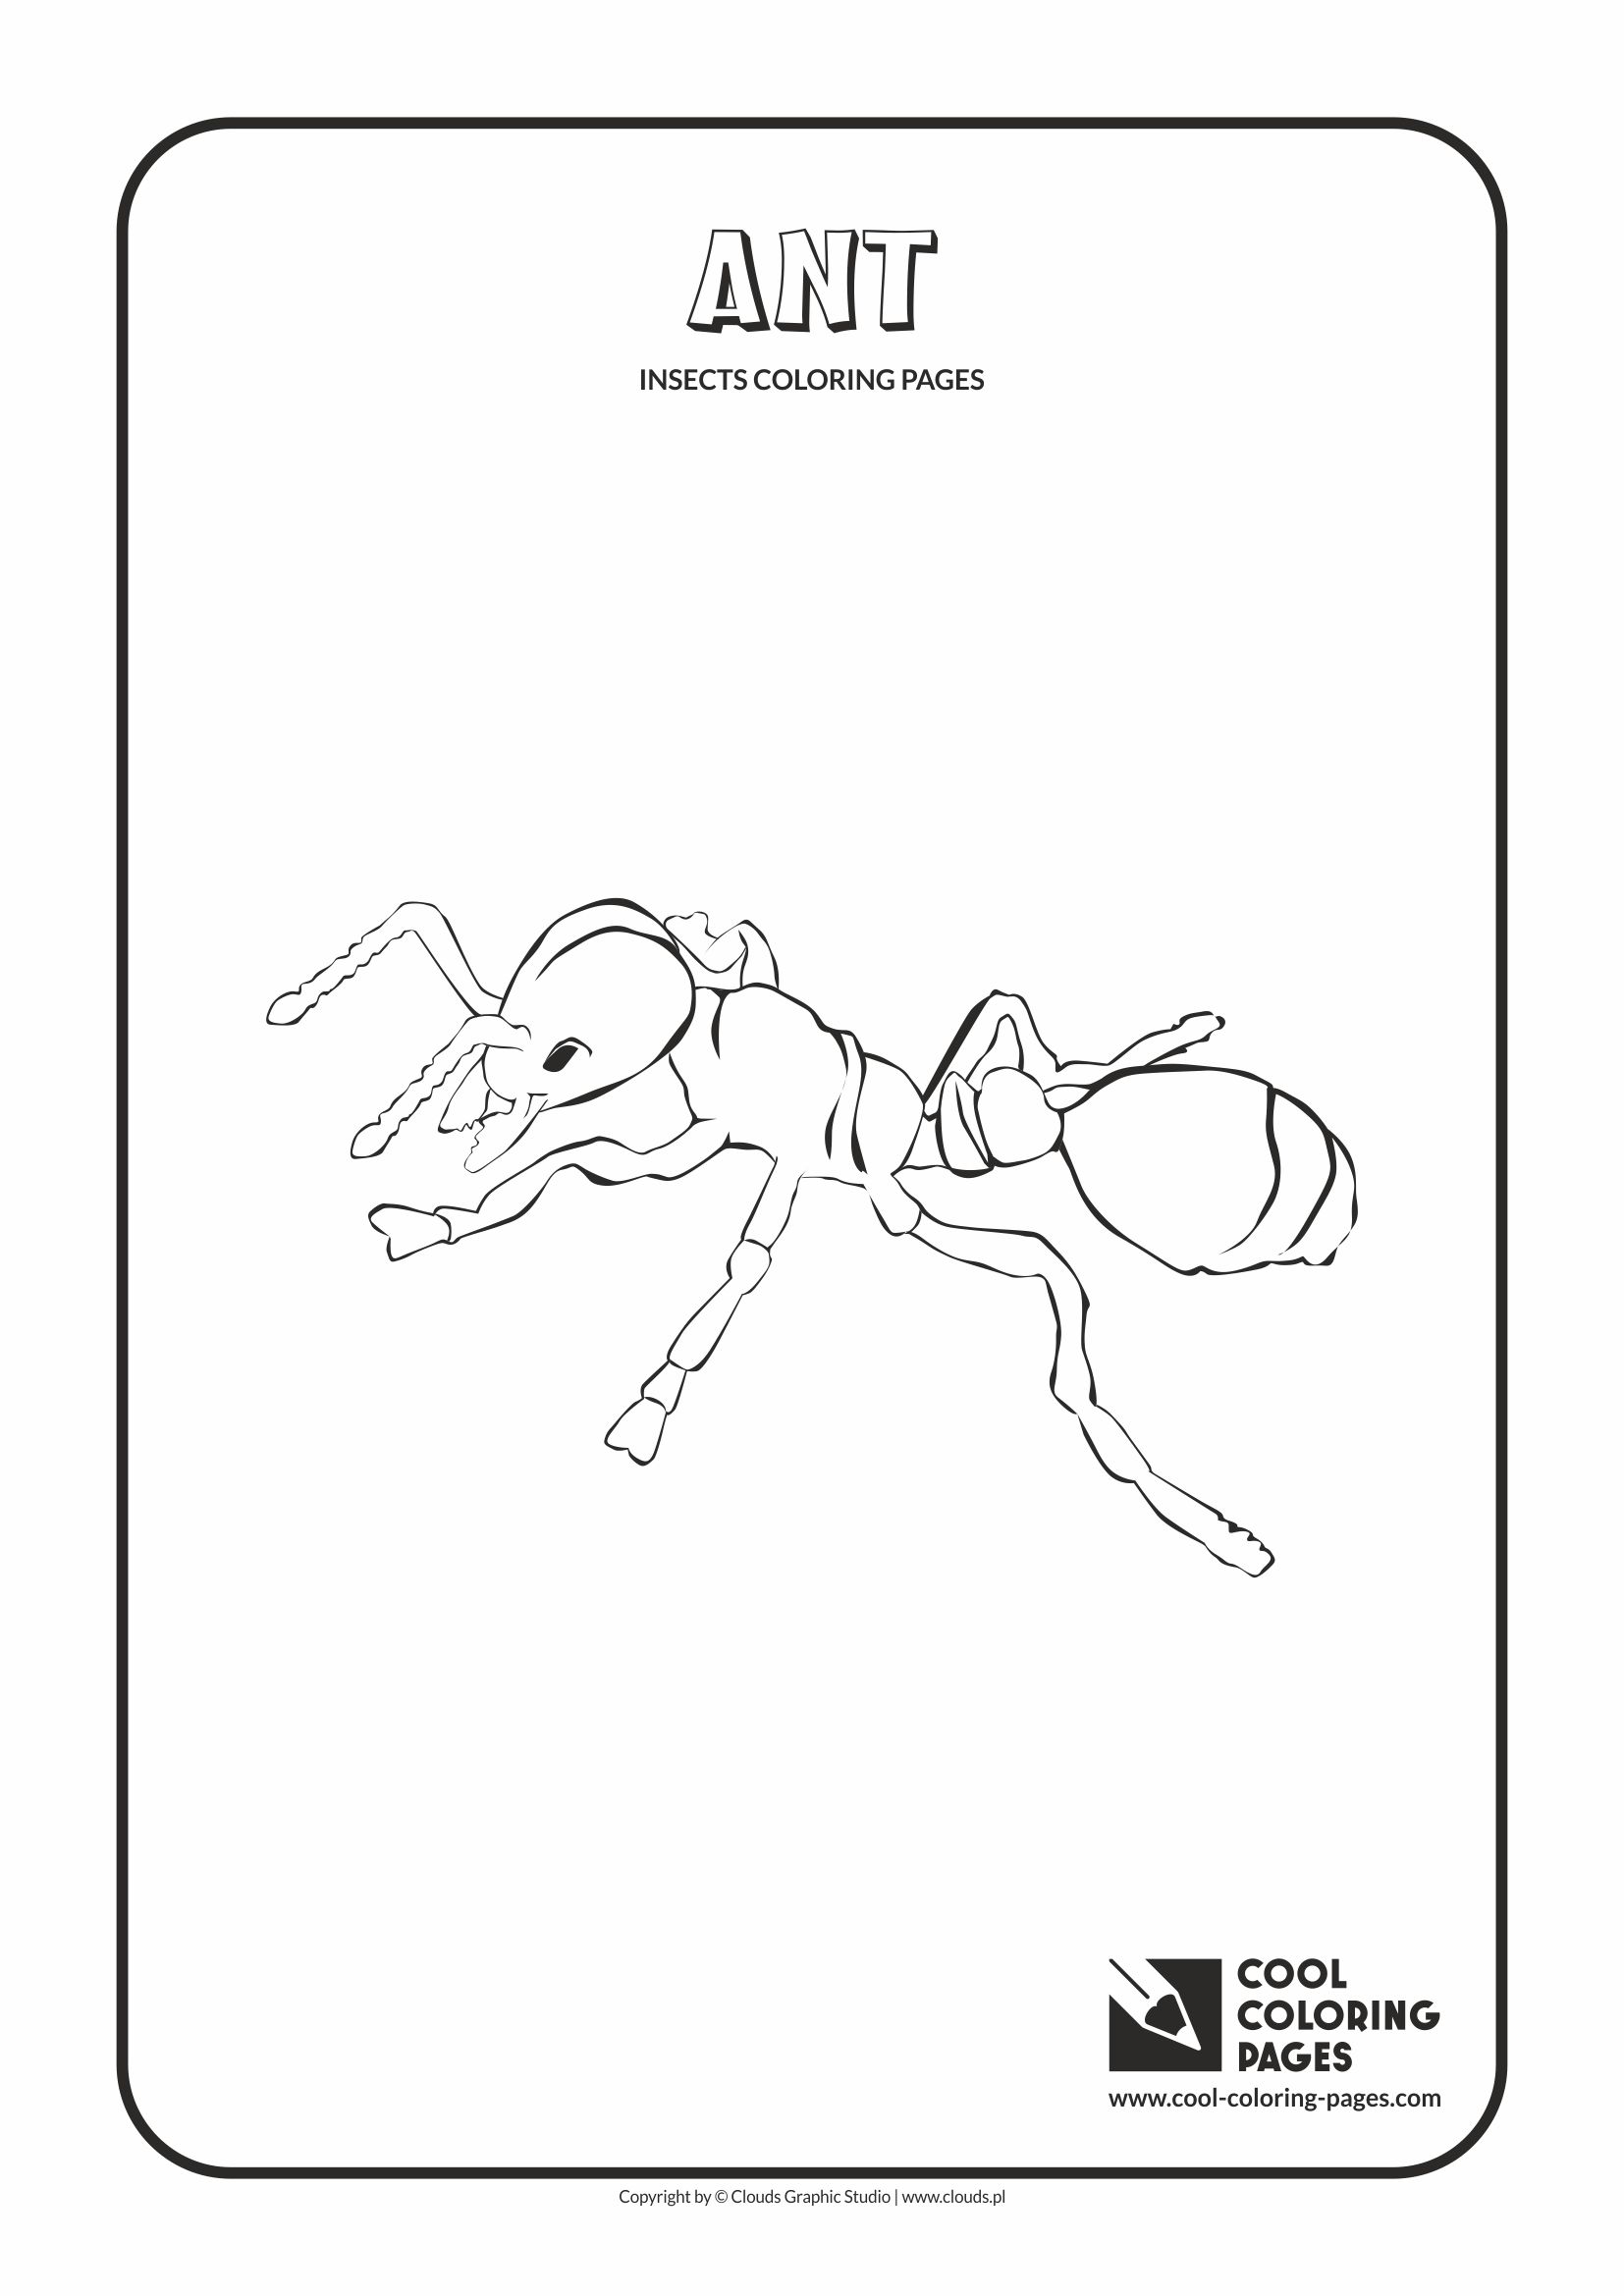 Cool Coloring Pages - Animals / Ant / Coloring page with ant